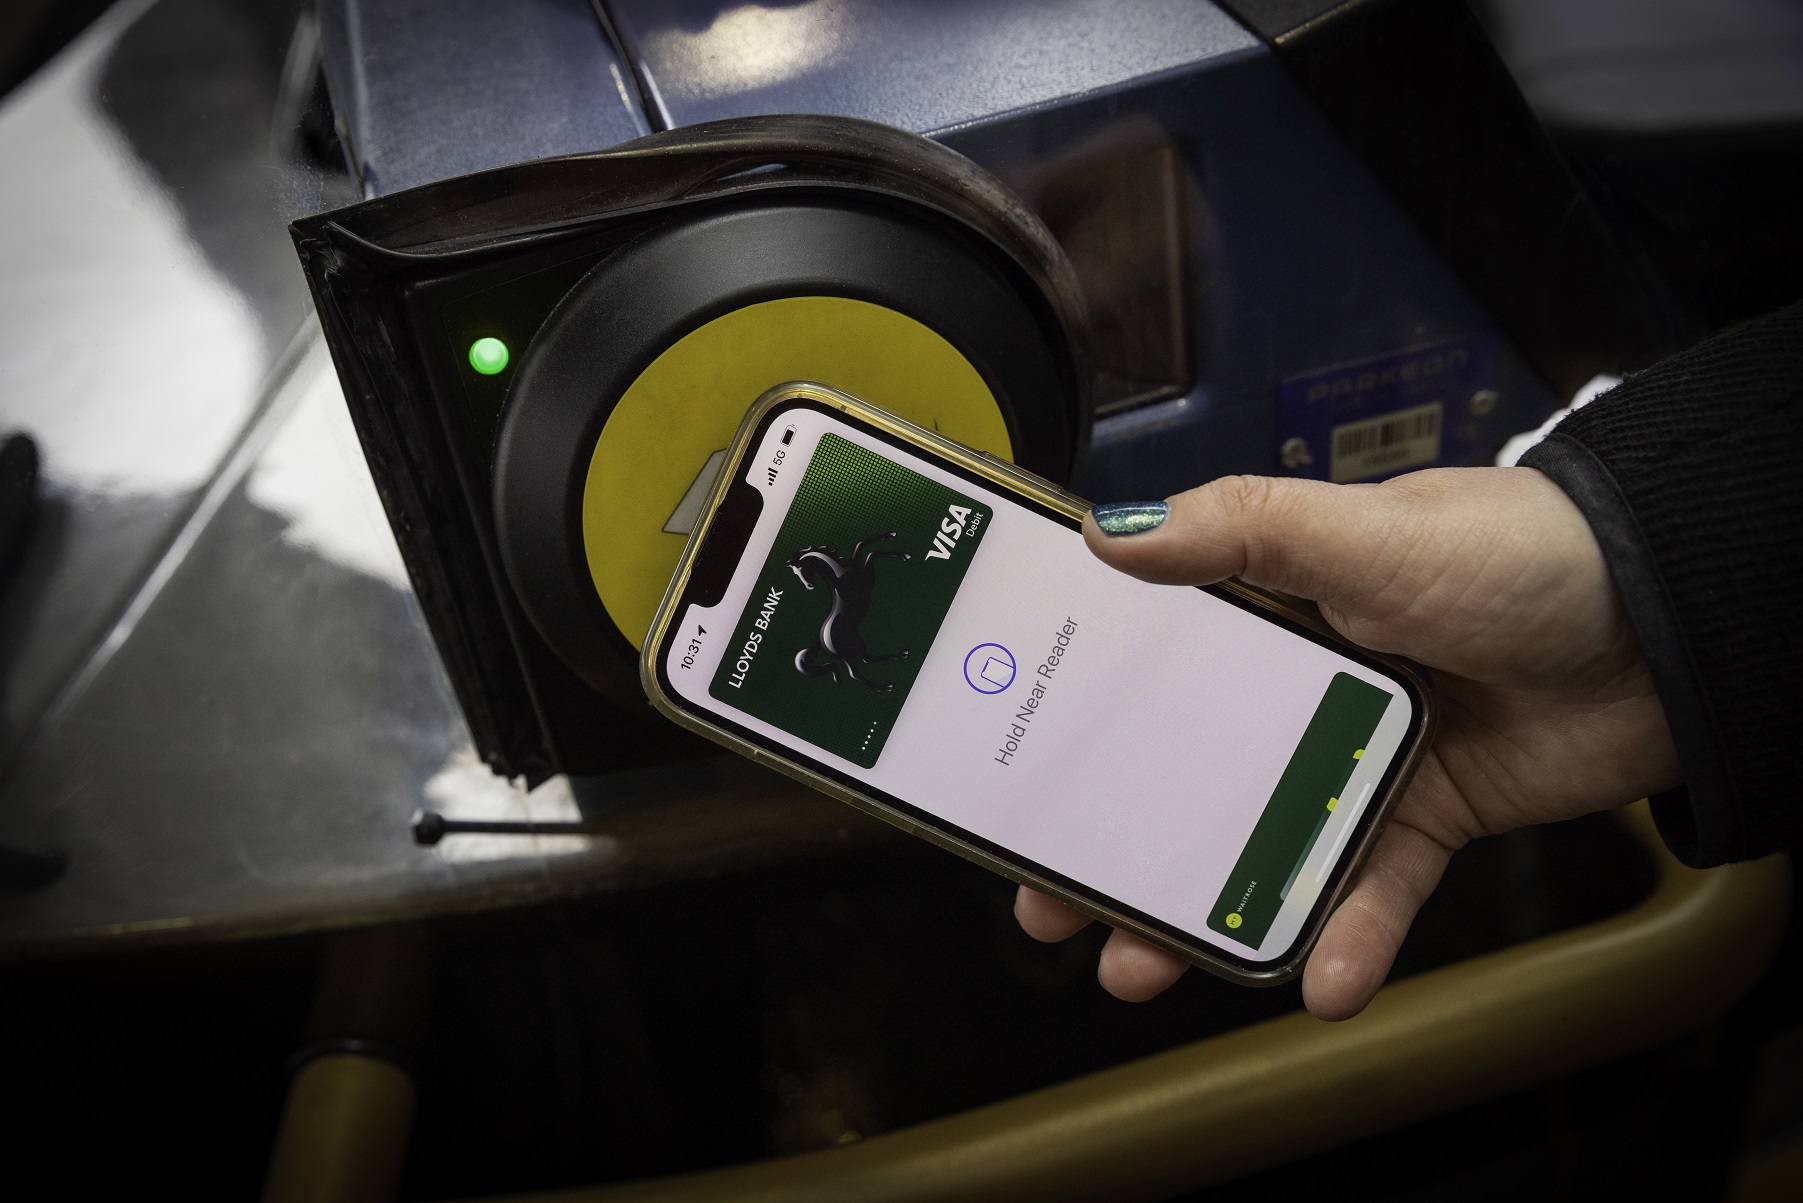 TfL marks 2.5bn bus journeys made with contactless payment